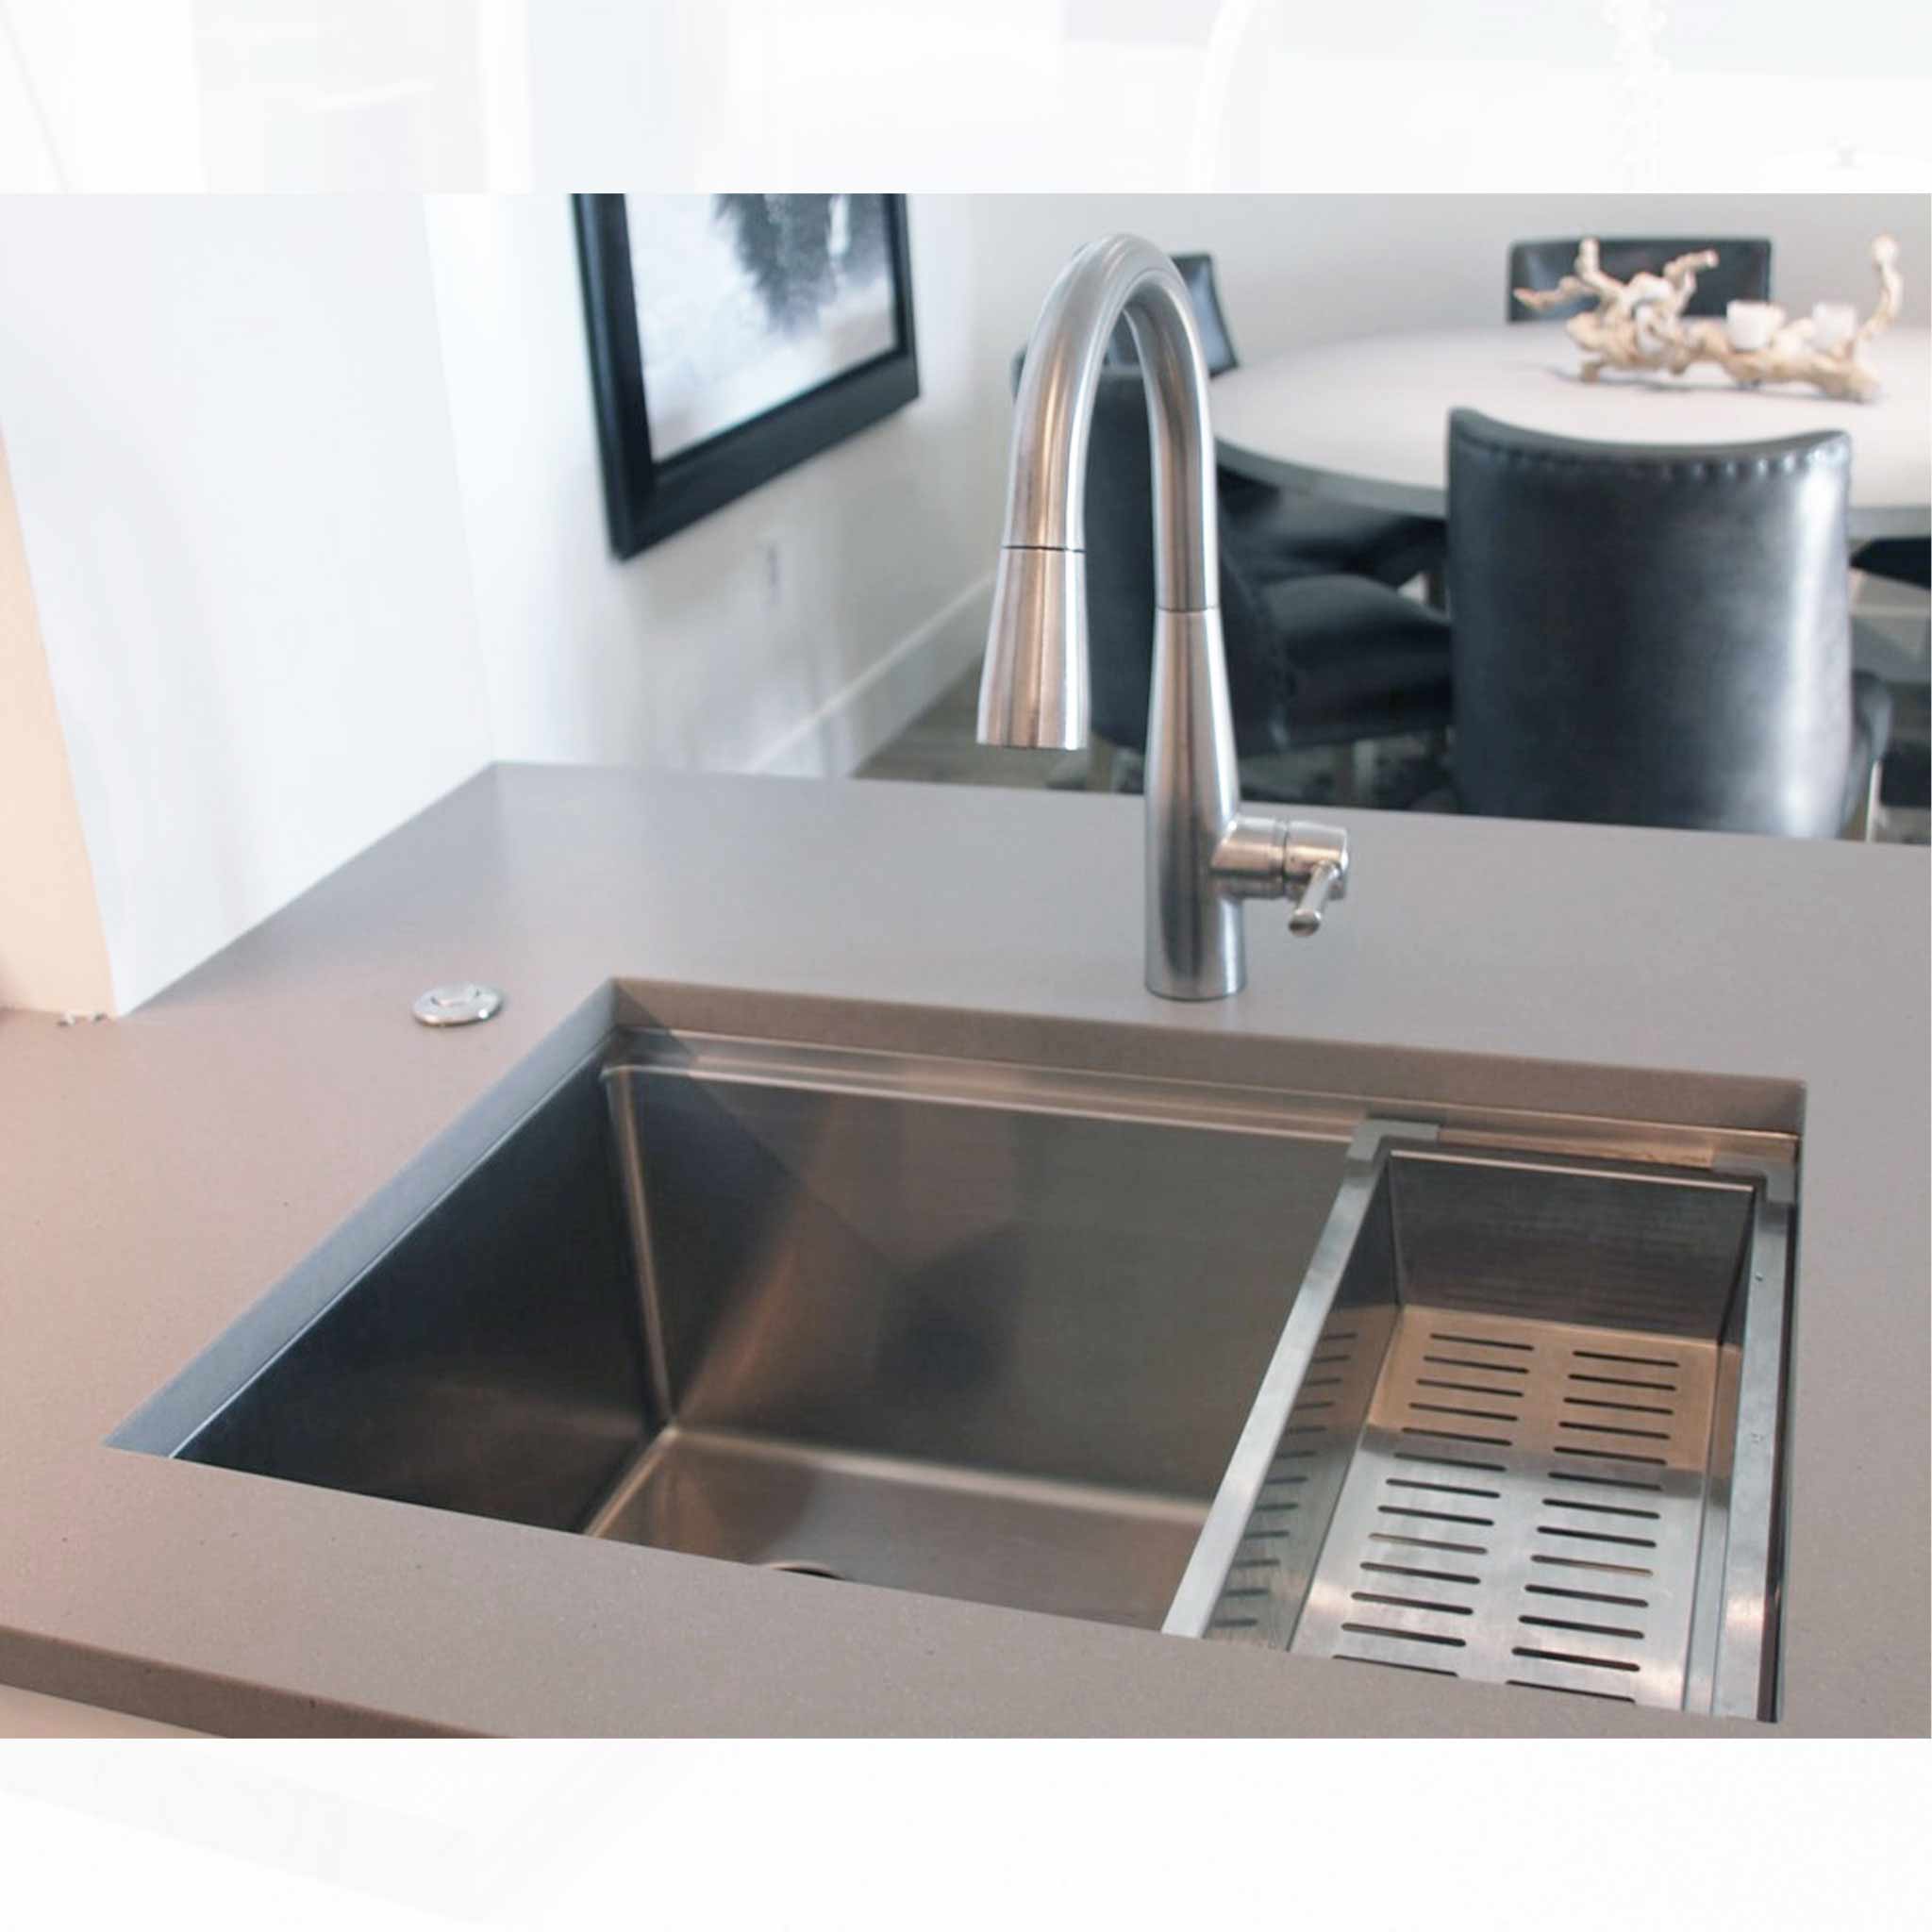 Client photo of our 26" workstation sink with offset drain left. Shown with our colander sink accessory.